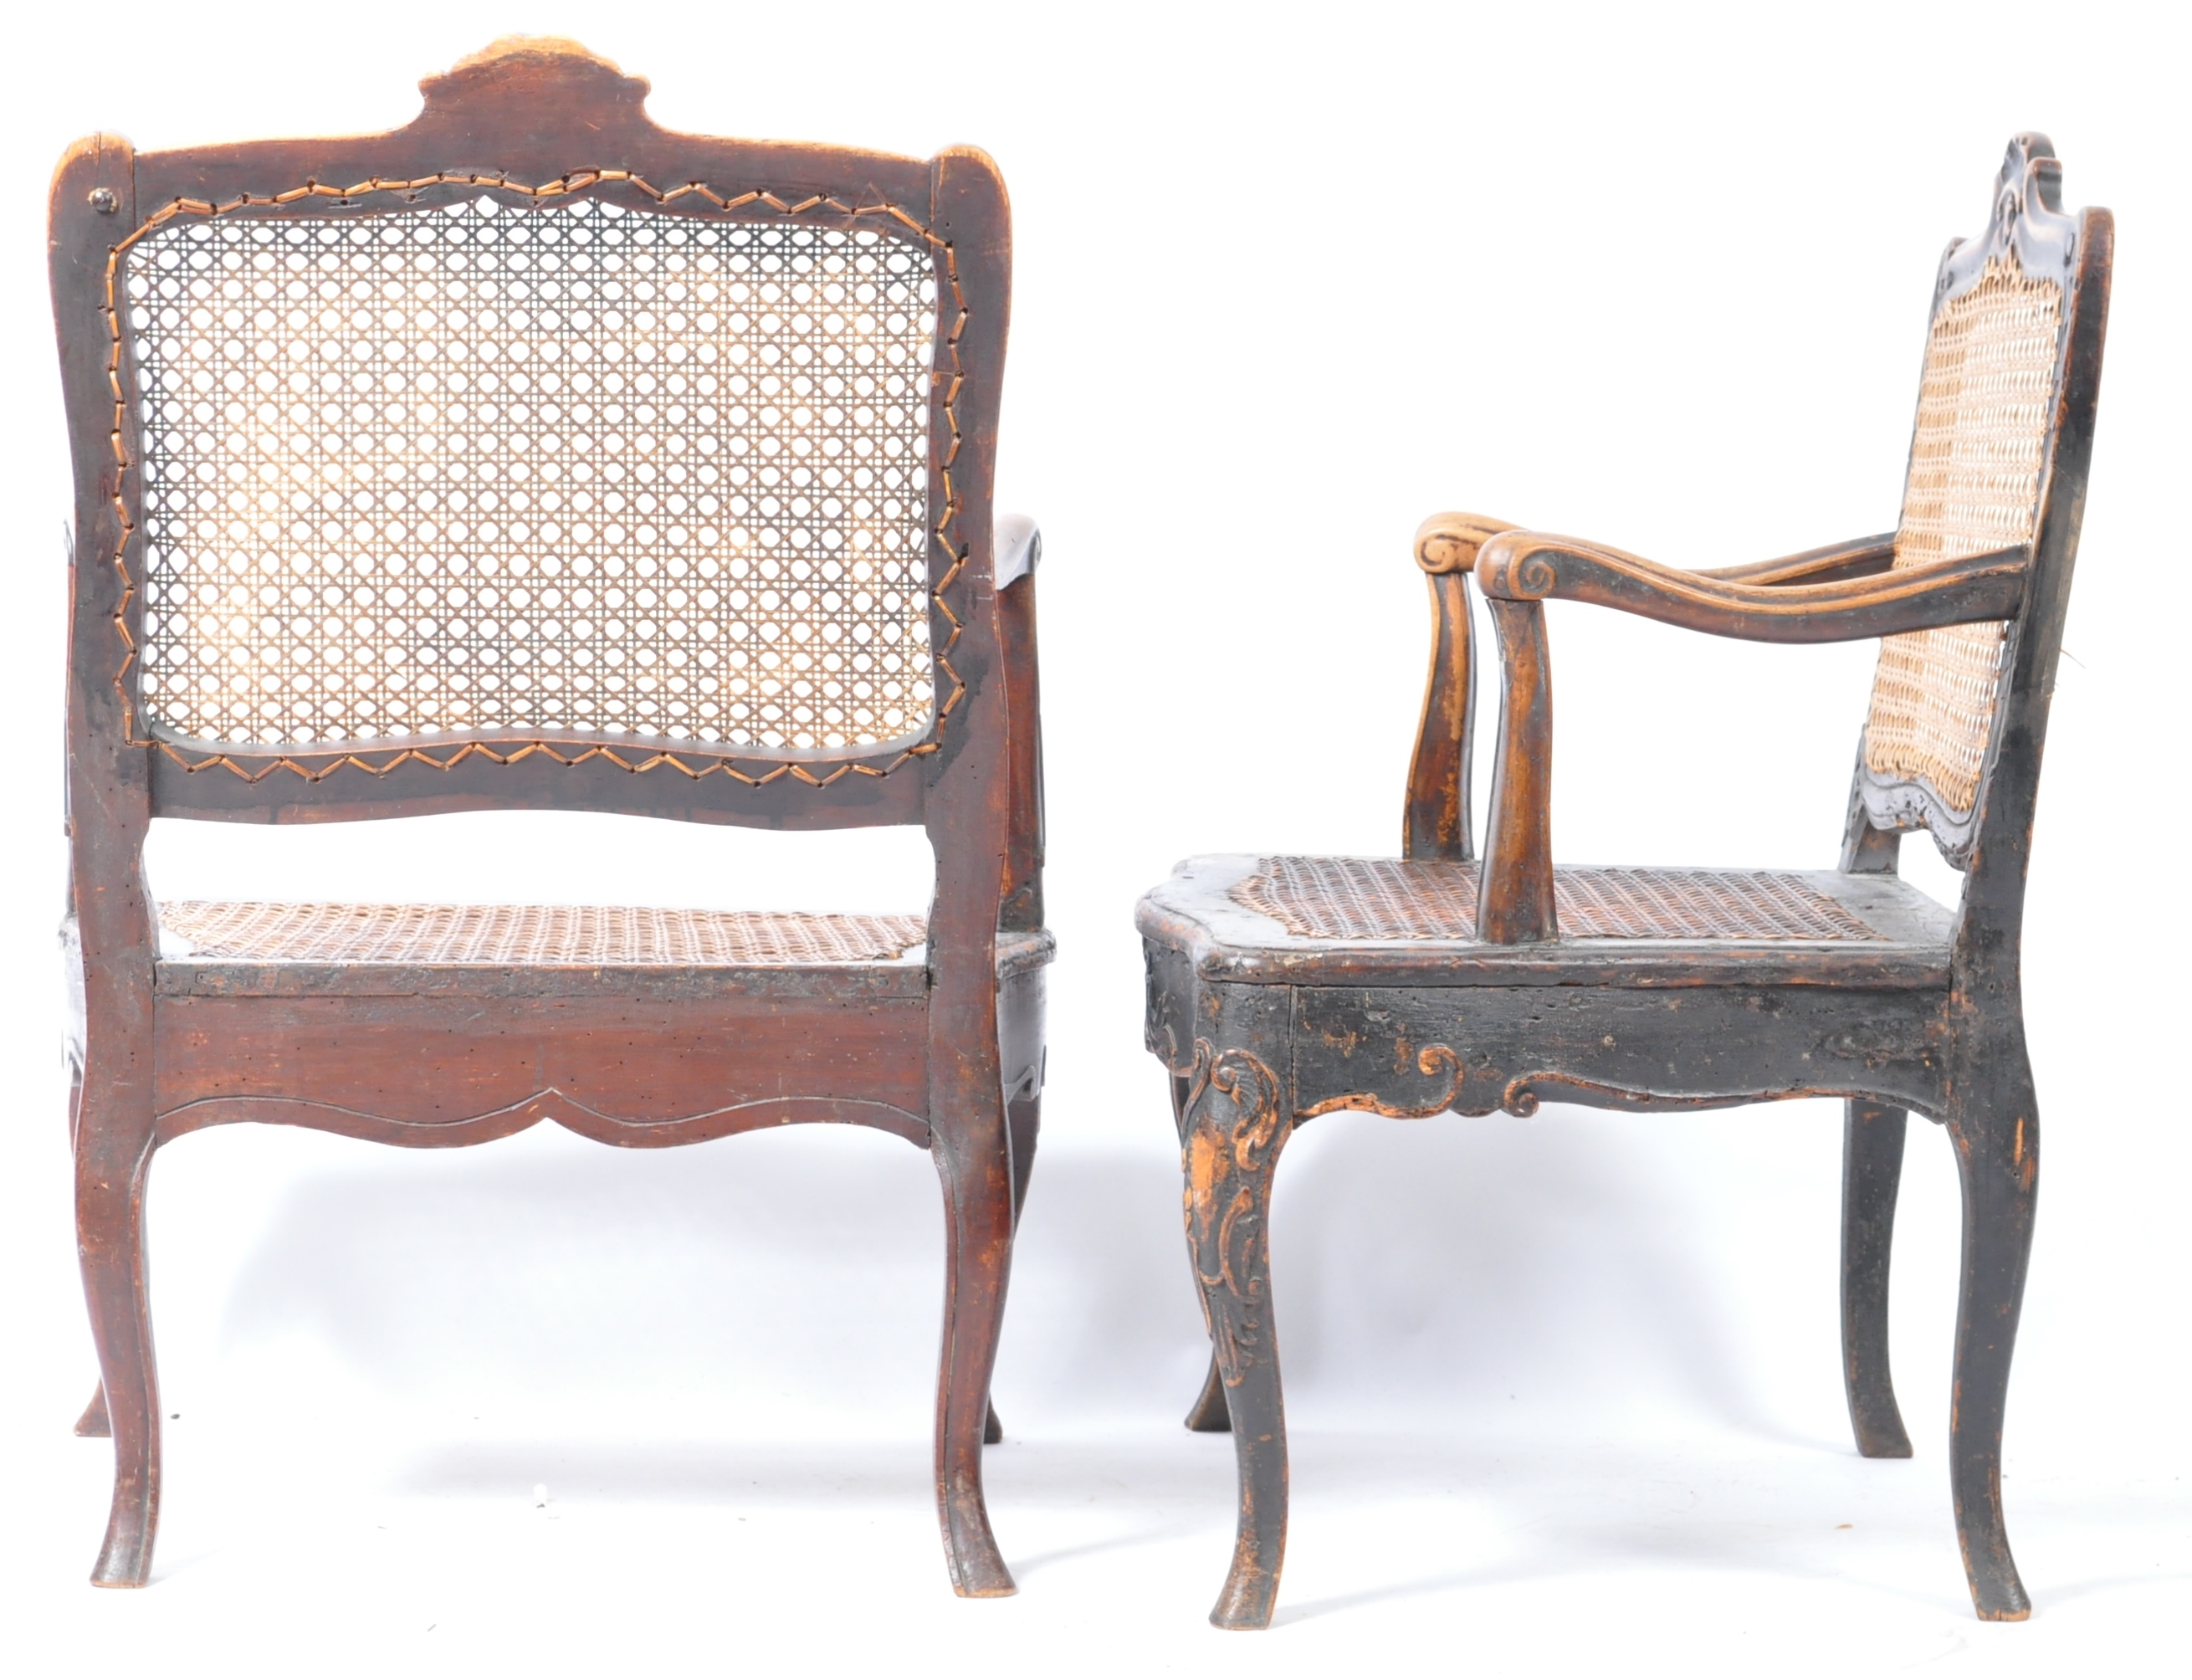 ANTIQUE PAIR OF 18TH CENTURY GEORGIAN CANE & WALNUT ELBOW CHAIRS - Image 8 of 9